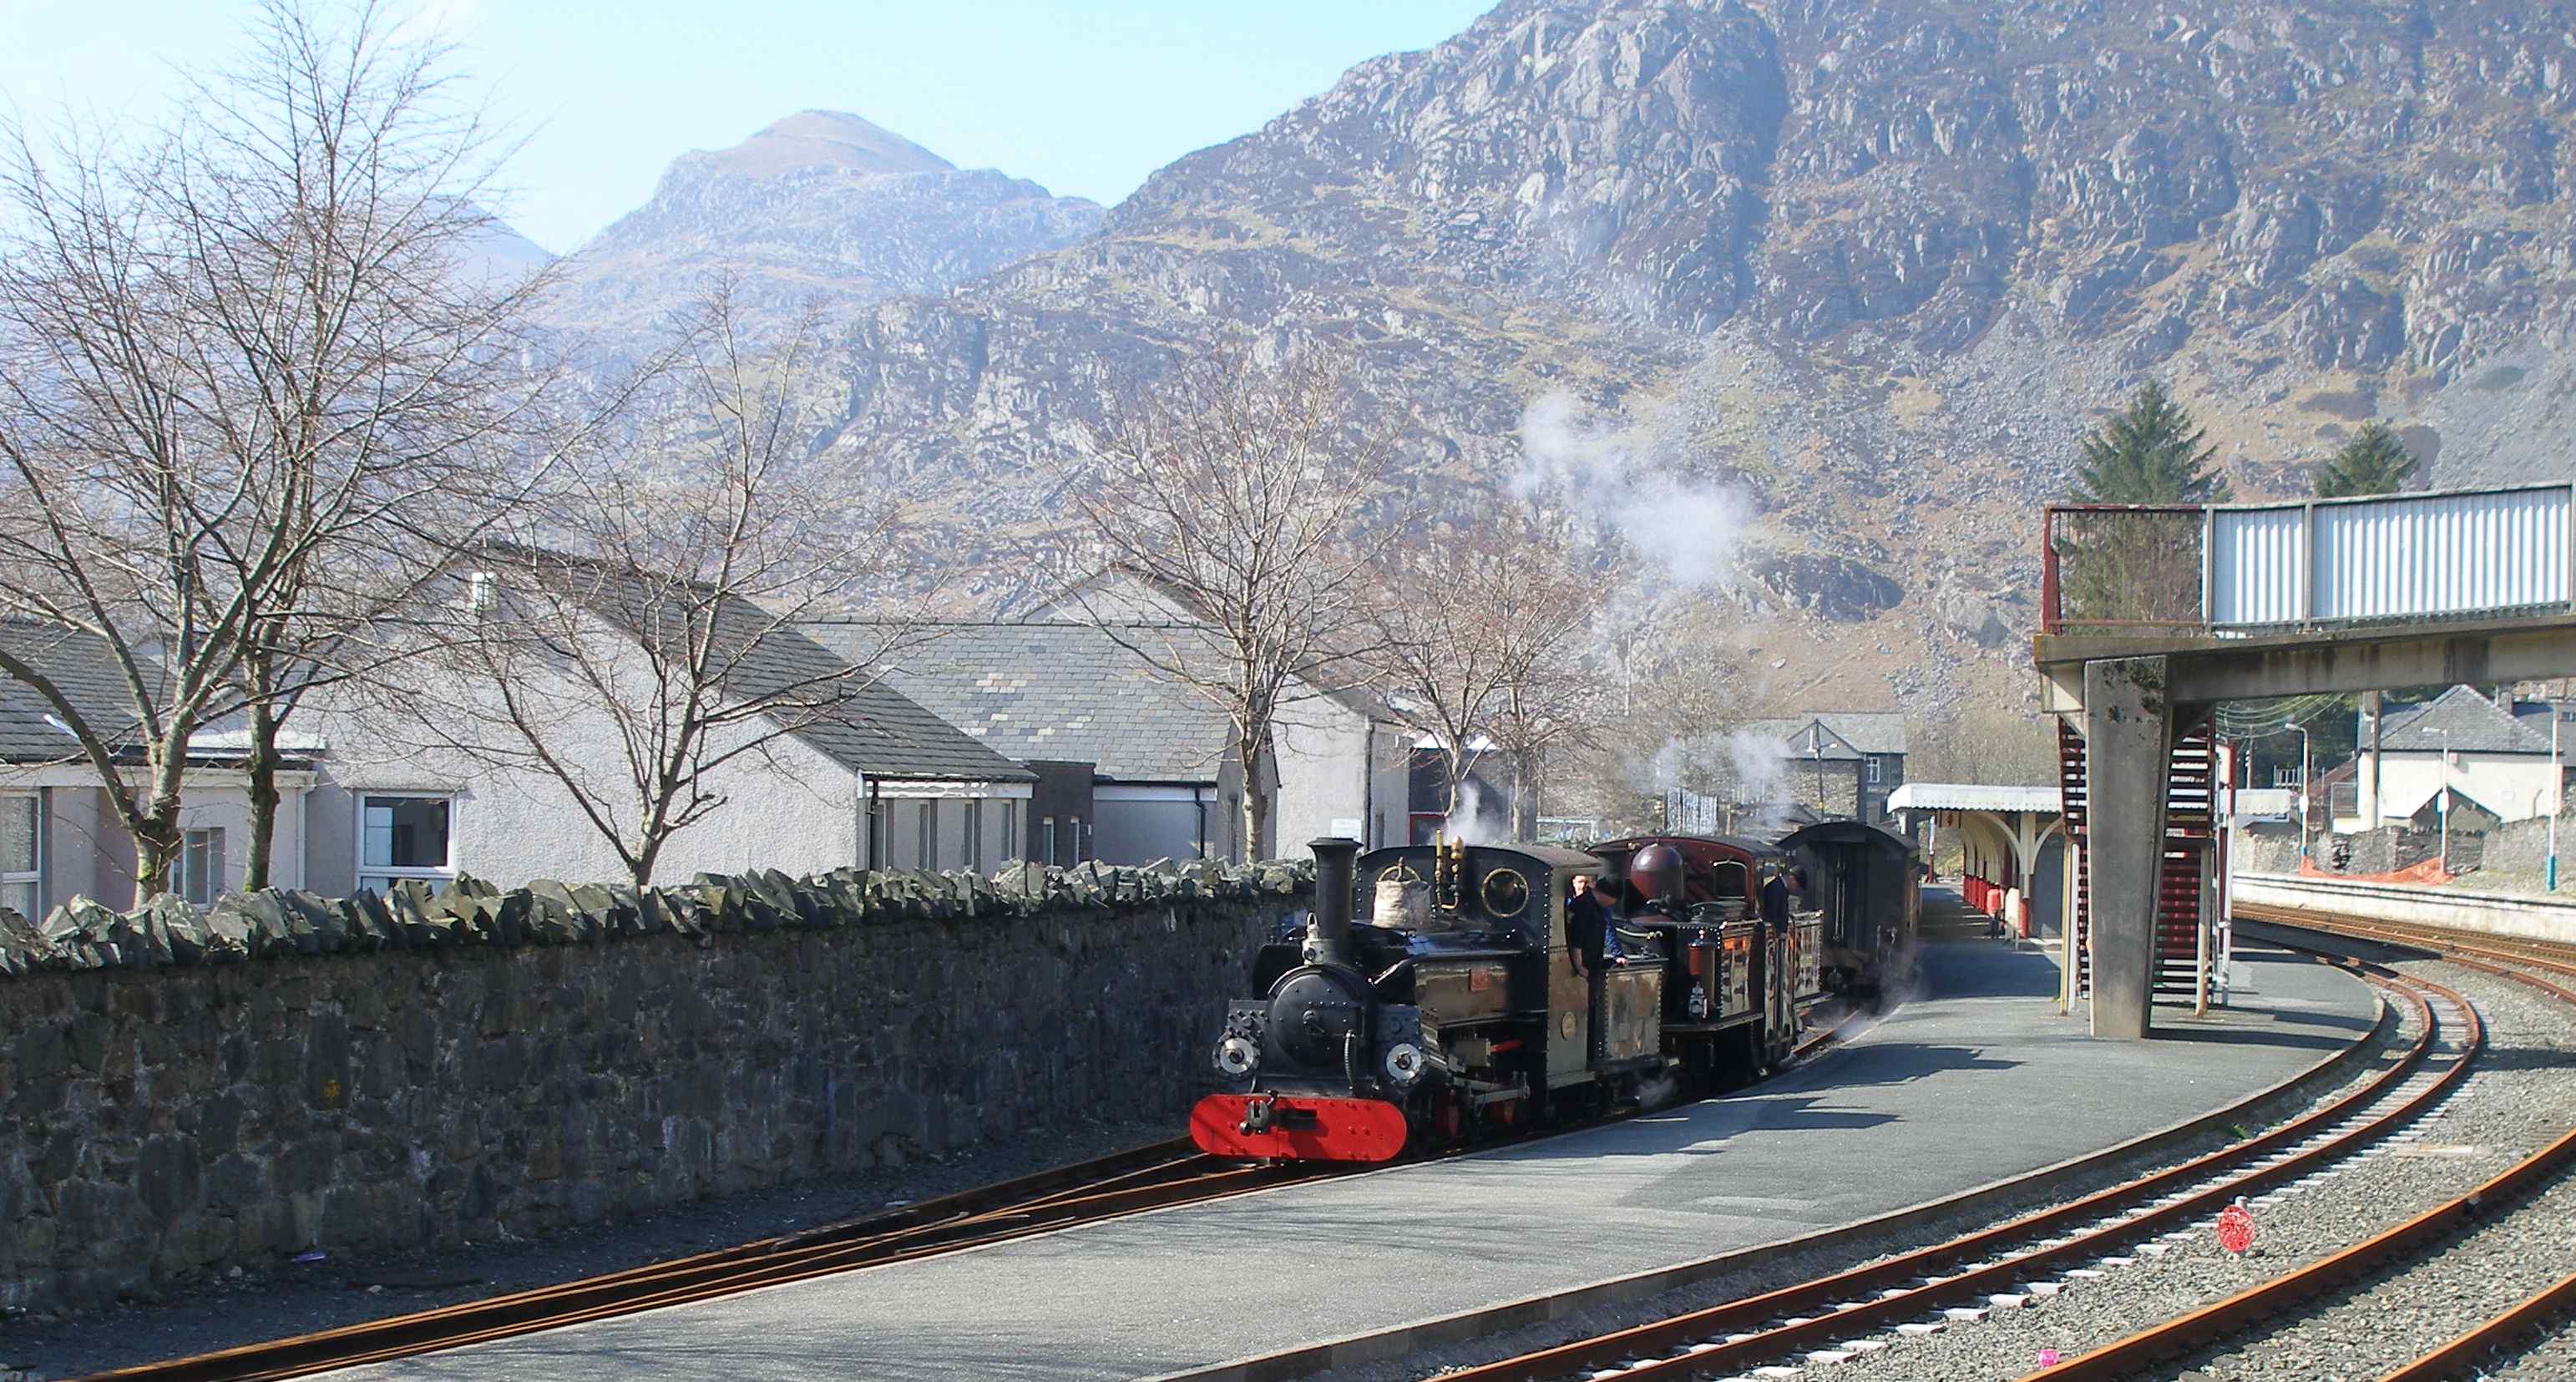 'Merddin Emrys' and 'Linda' running round at Blaenau Ffestiniog. The Network Rail standard gauge line in the foreground once ran through to Bala and Bala Junction; latterly servicing the power station at Trawsfynydd, and now terminates at a buffer stop to form a headshunt. Track remains to the Power Station, and has recently been cleared by local volunteers as part of a rail cycle tourist attraction proposal, although the infrastructure would require a major maintenance effort for trains to be restored. 